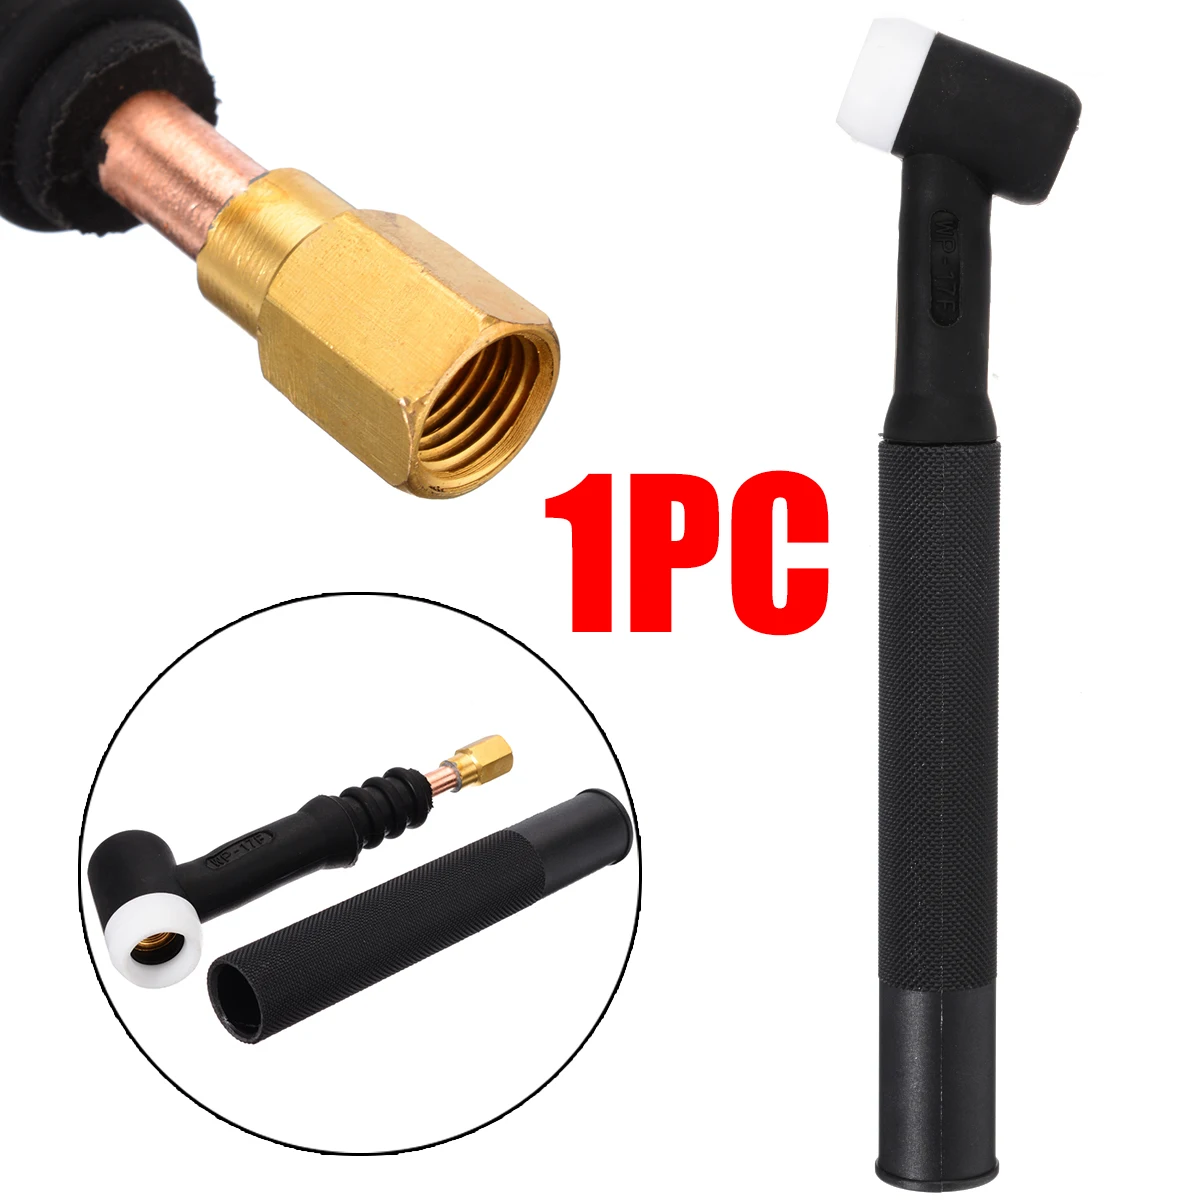 1pc New Practical 150A WP-17F TIG Welding Torch Head Body Flexible Air-Cooled With Handle Welding Tool Supporting Equipment 4m qq150 qq 150 tig welding torch gas and power separate air cooled 150a with dkj10 25 connector